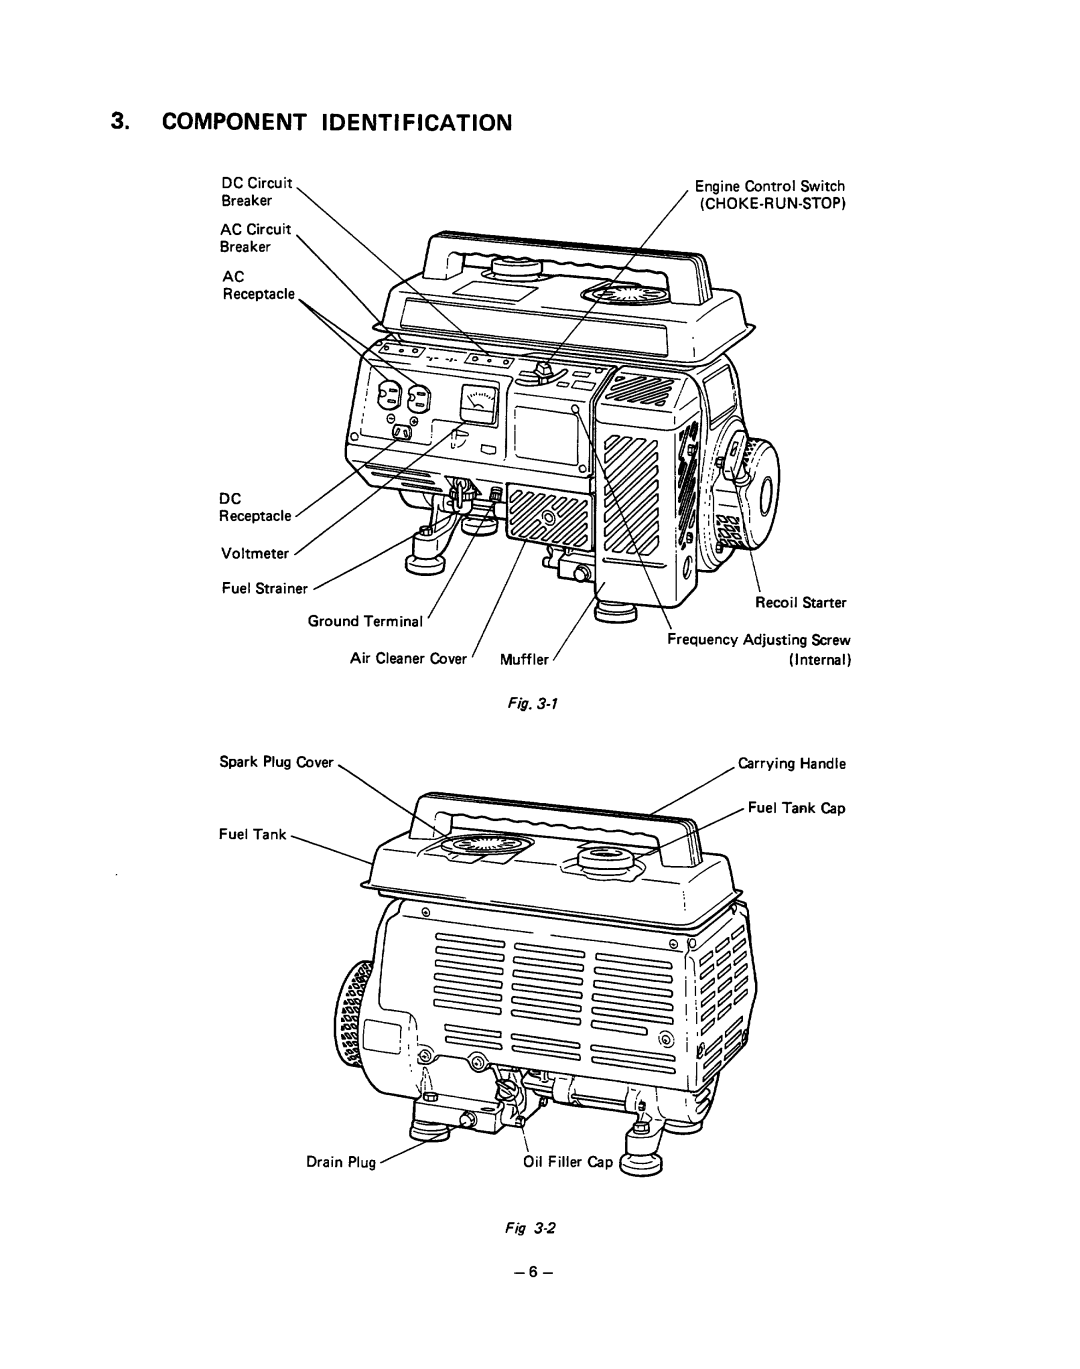 Subaru Robin Power Products R1200 service manual Component Identification 